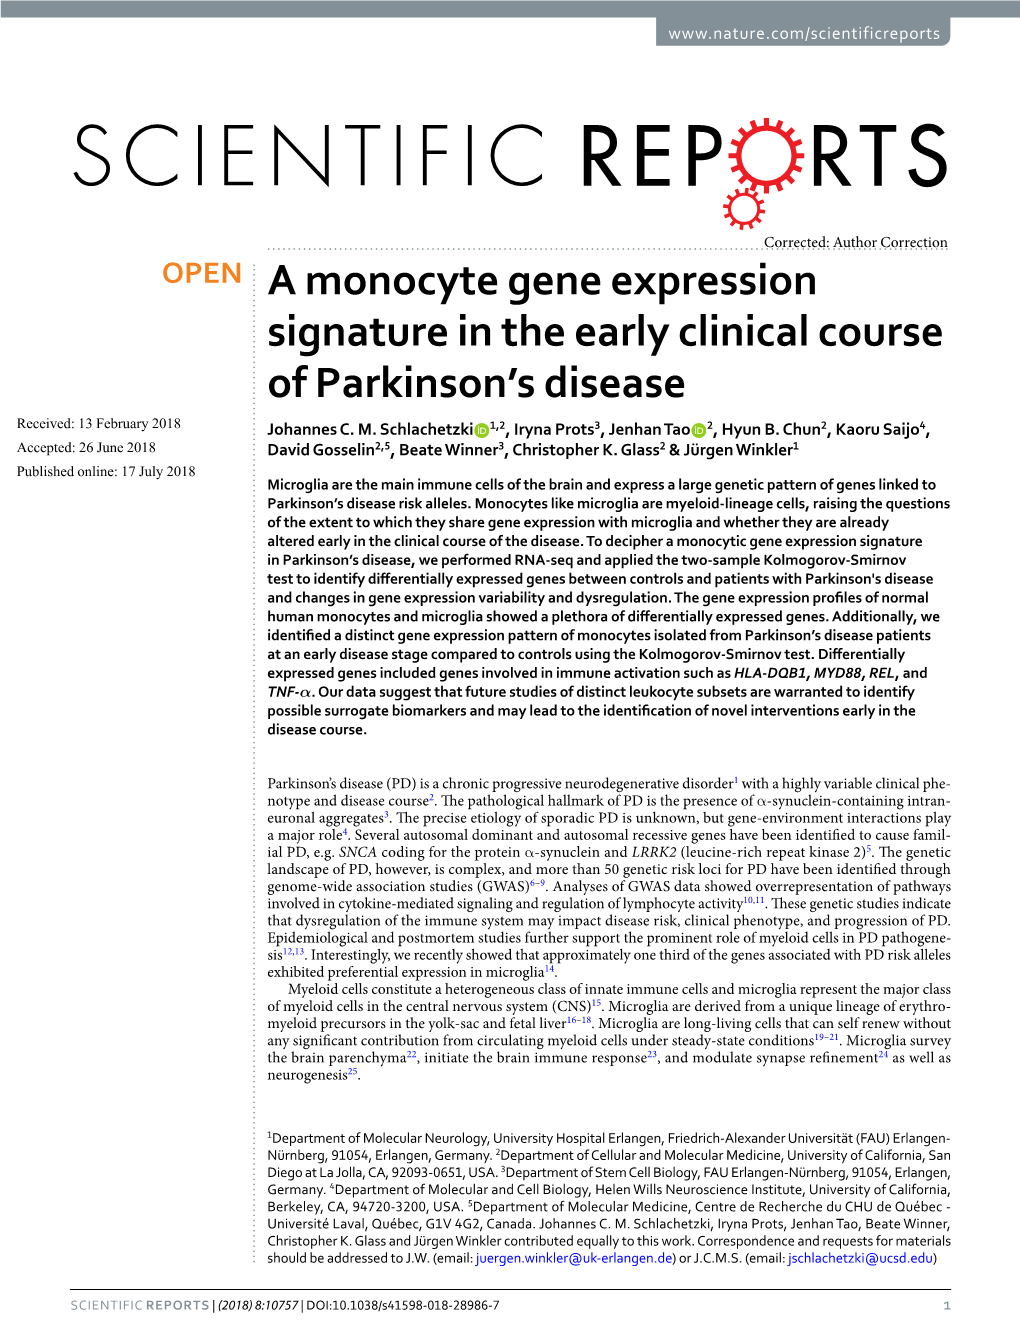 A Monocyte Gene Expression Signature in the Early Clinical Course of Parkinson’S Disease Received: 13 February 2018 Johannes C